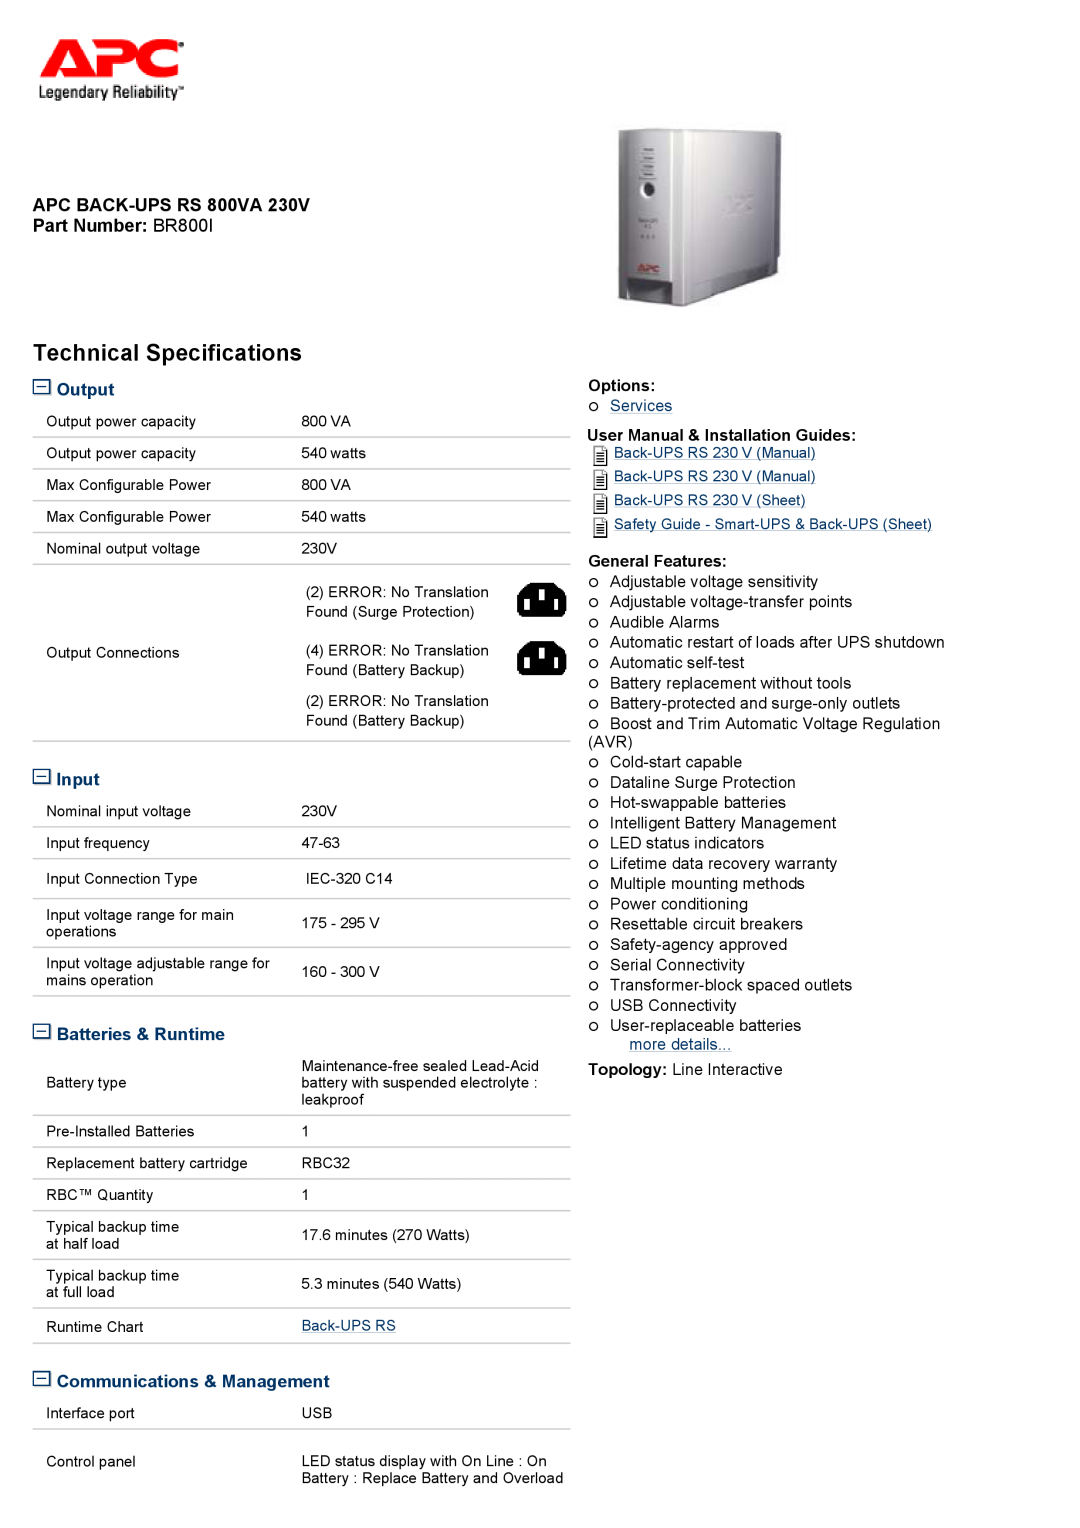 APC BR800I technical specifications Output, Input, Batteries & Runtime, Communications & Management, Options, Services 